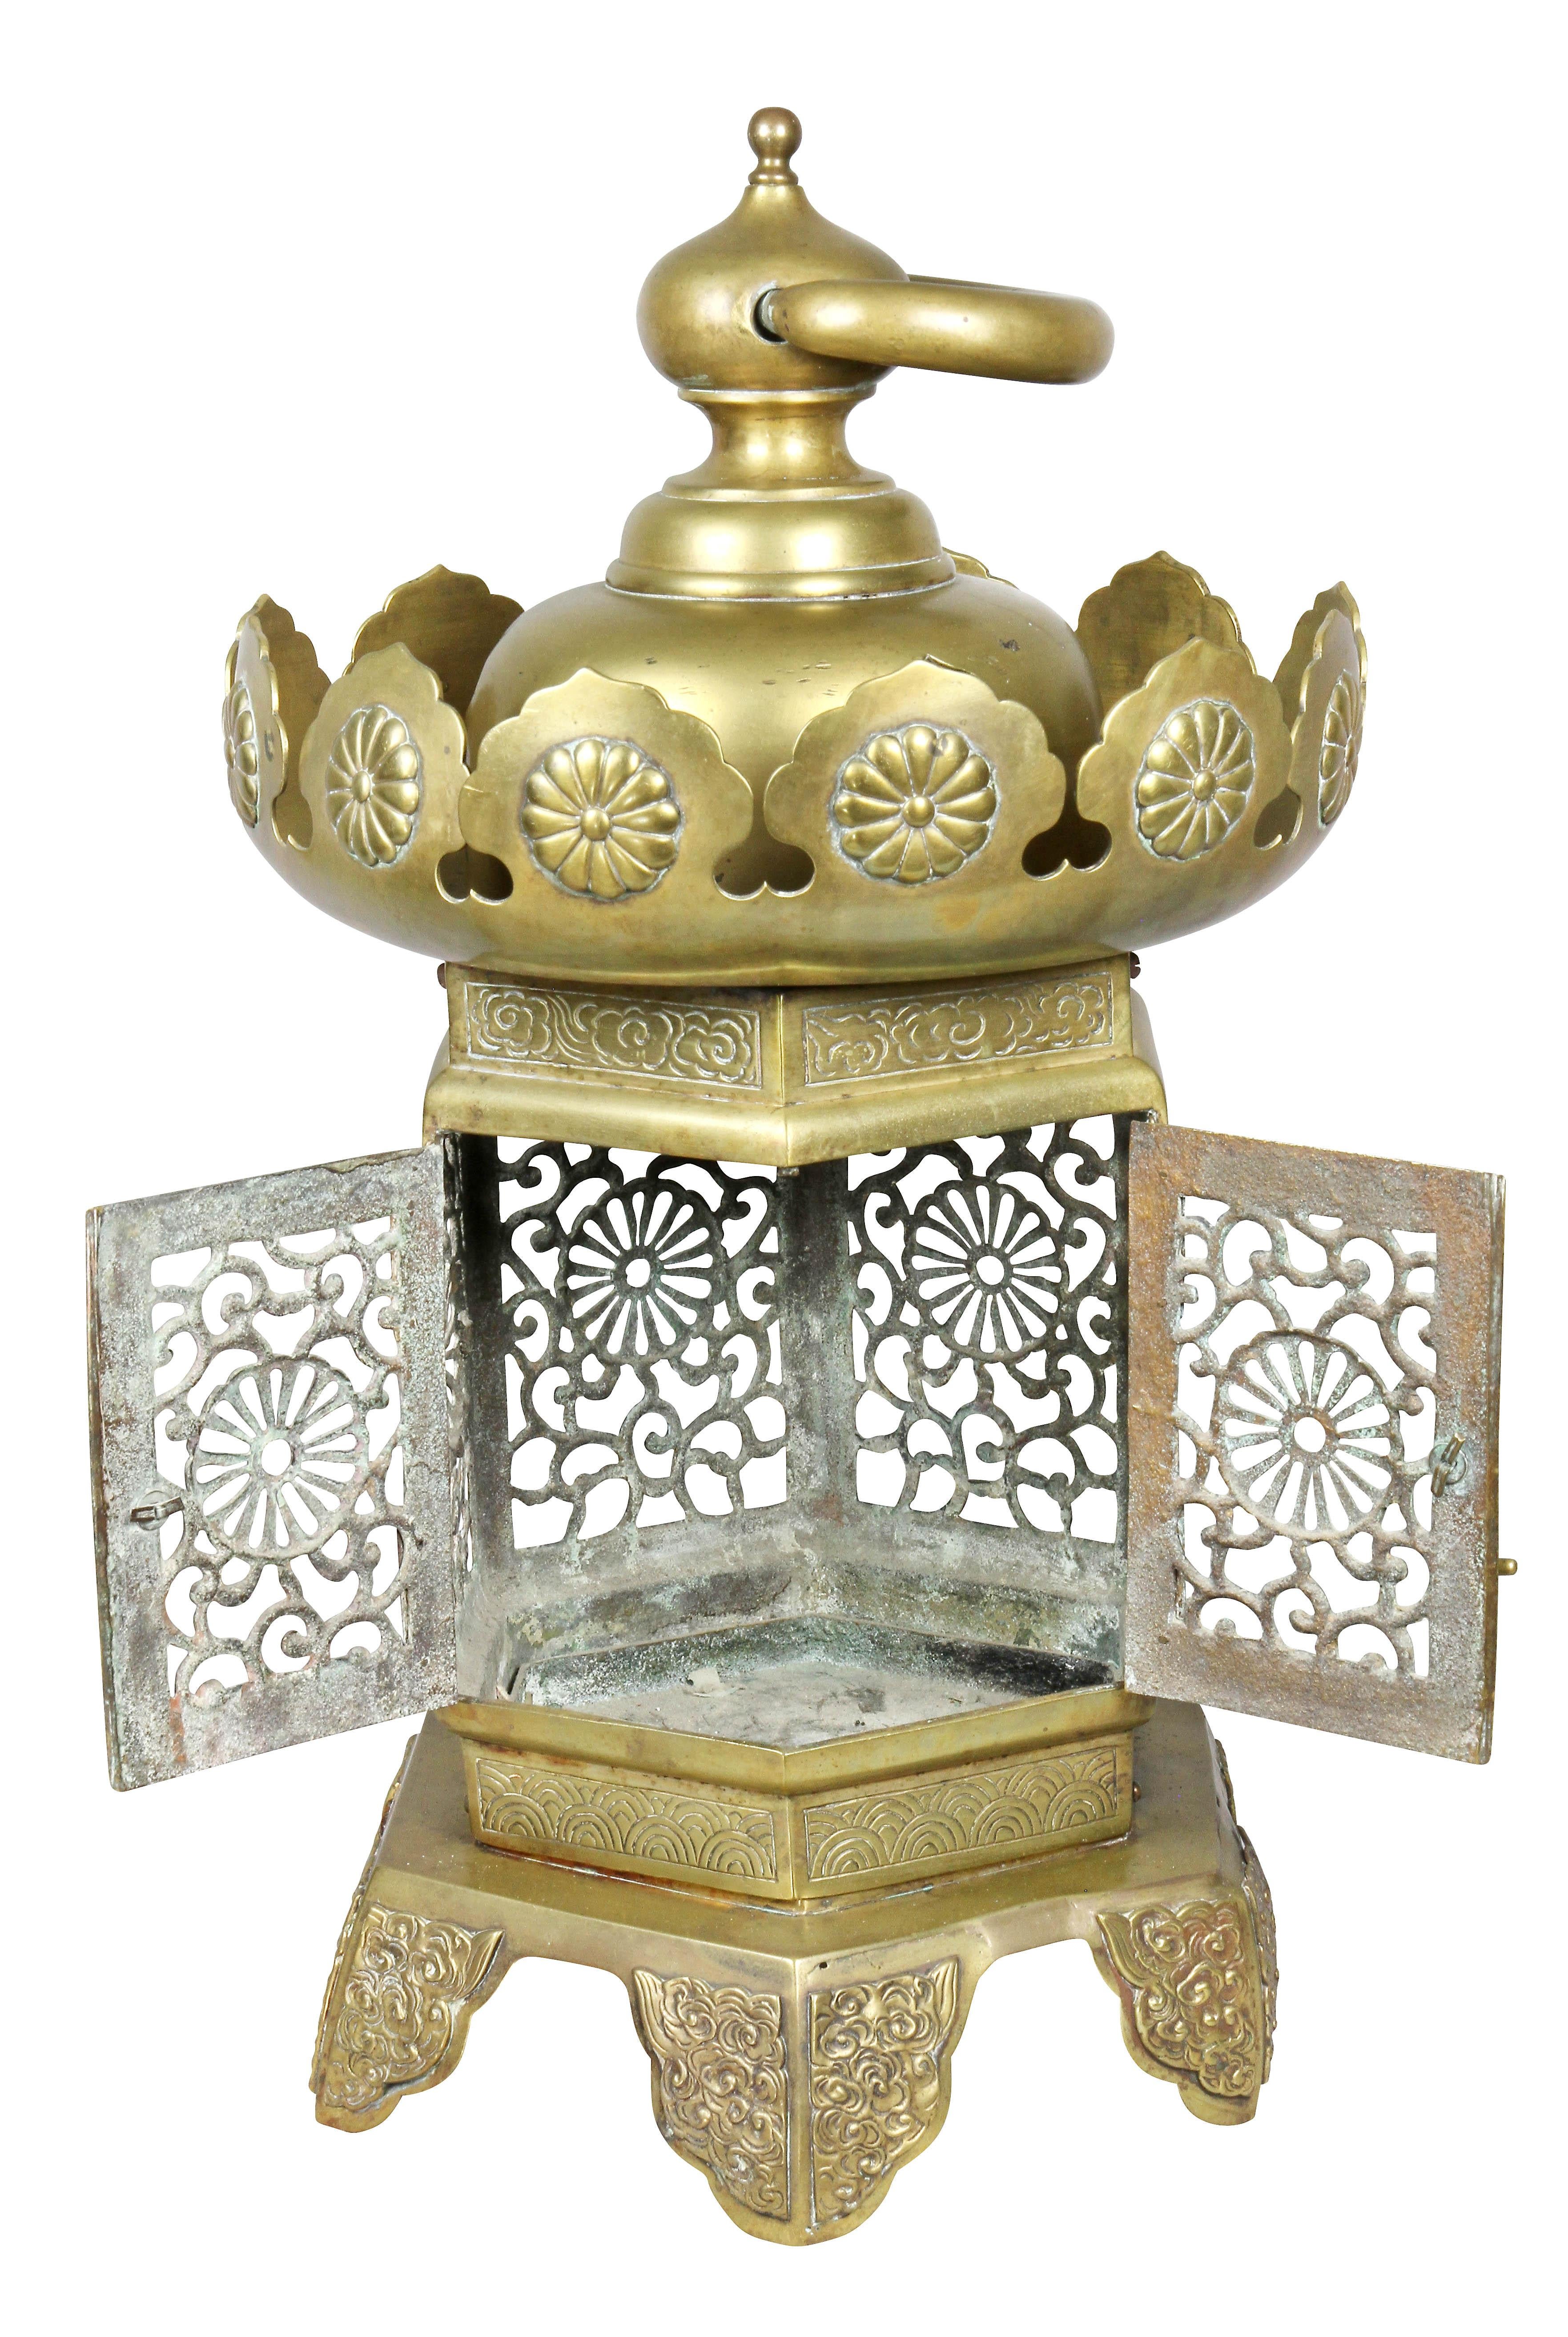 With ring finial and pagoda top with chrysanthemum rosettes, open grillwork lantern area, four shaped feet. Provenance; C.T Loo.